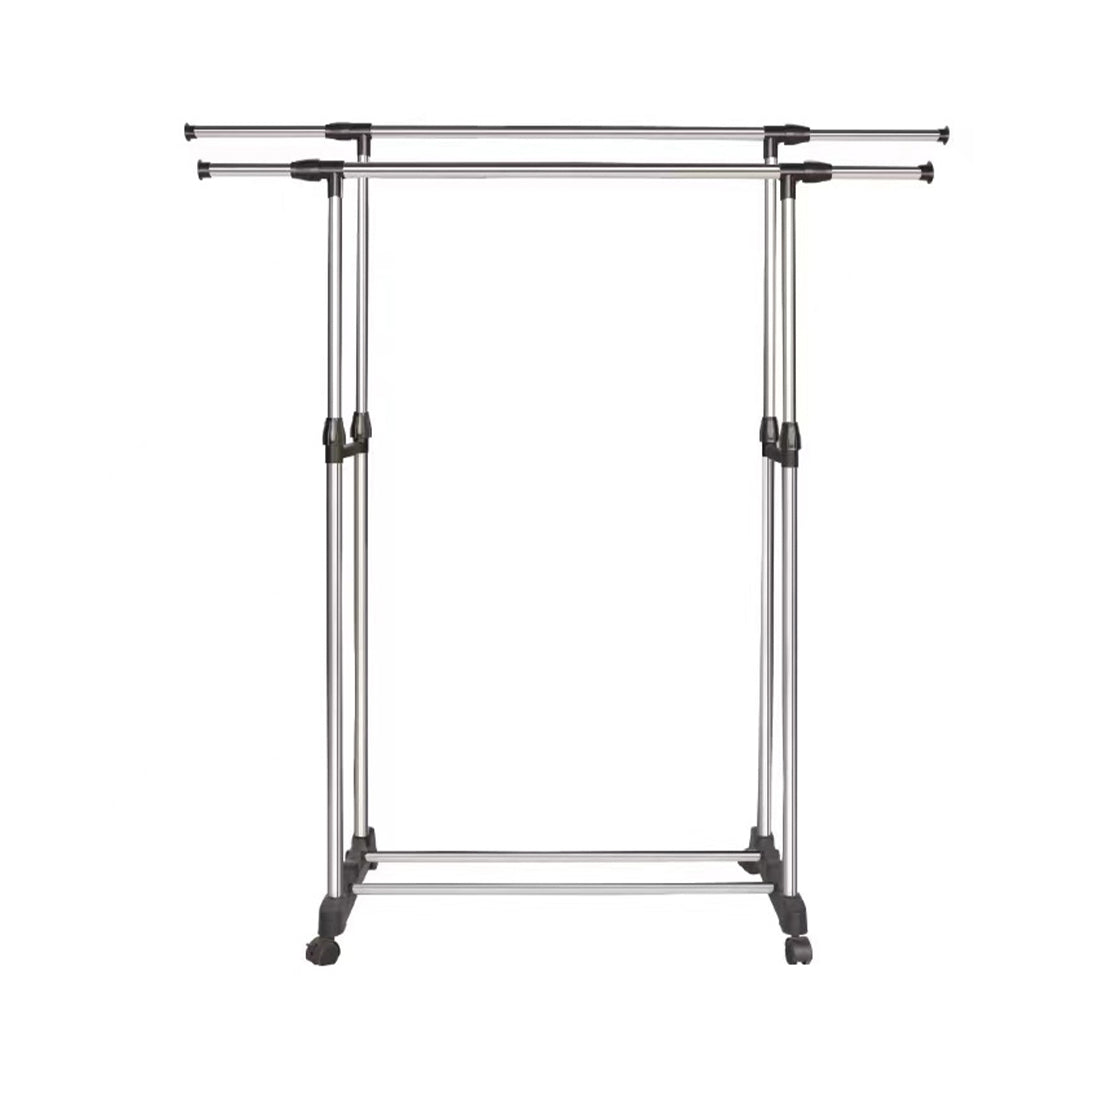 Adjustable Double Pole Clothesdrying Drying Rack Stand With Wheels Drying Racks & Hangers ONE2WORLD Double Pole 